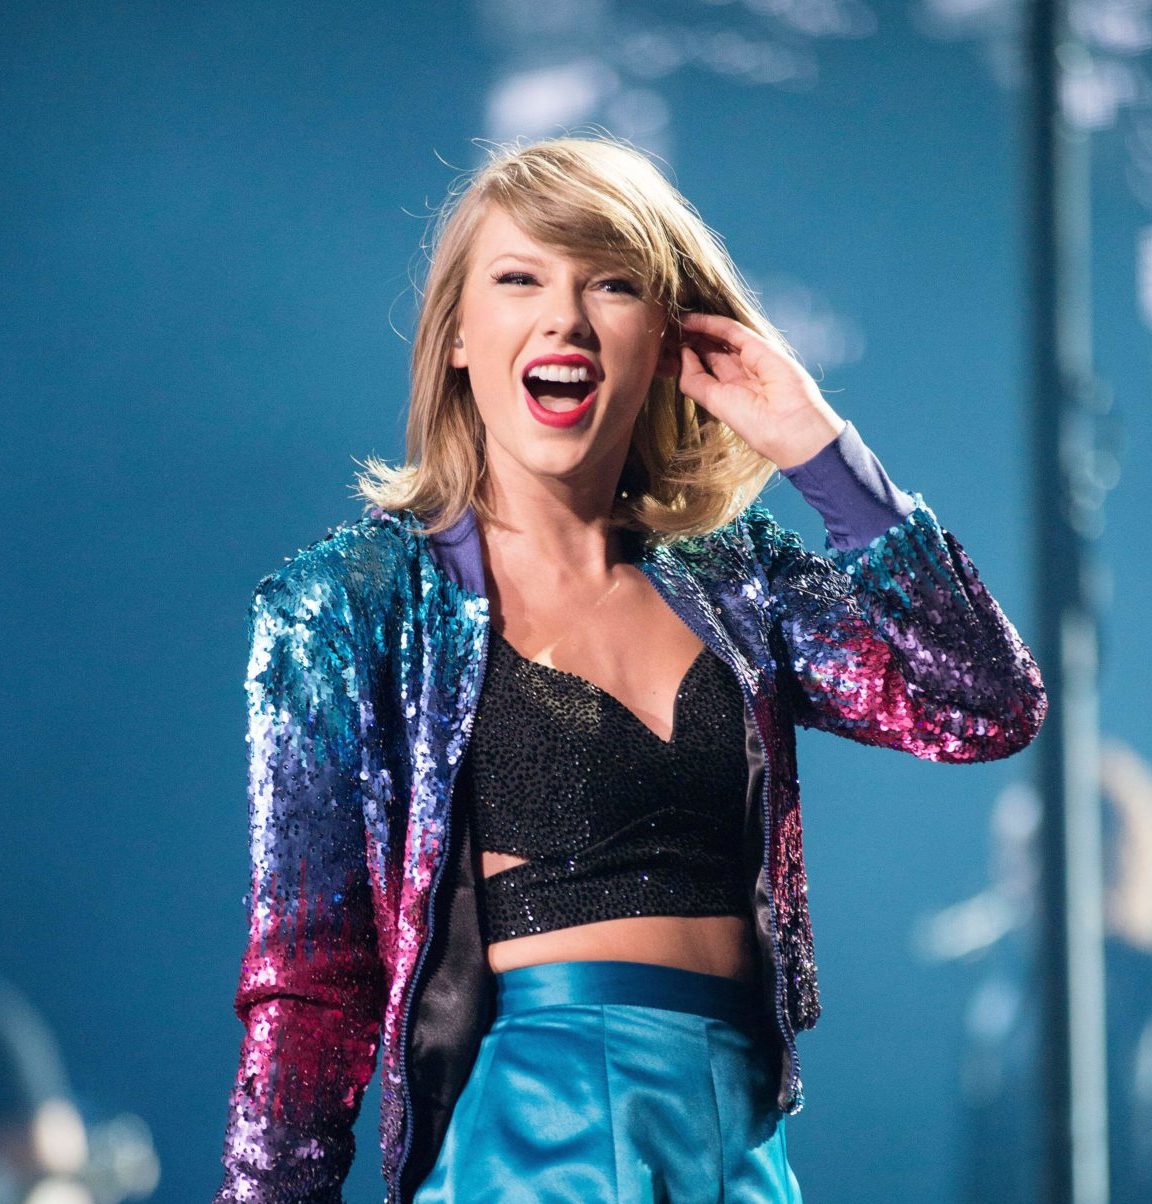 Taylor Swift on stage during her '1989 World Tour Live' in 2015.